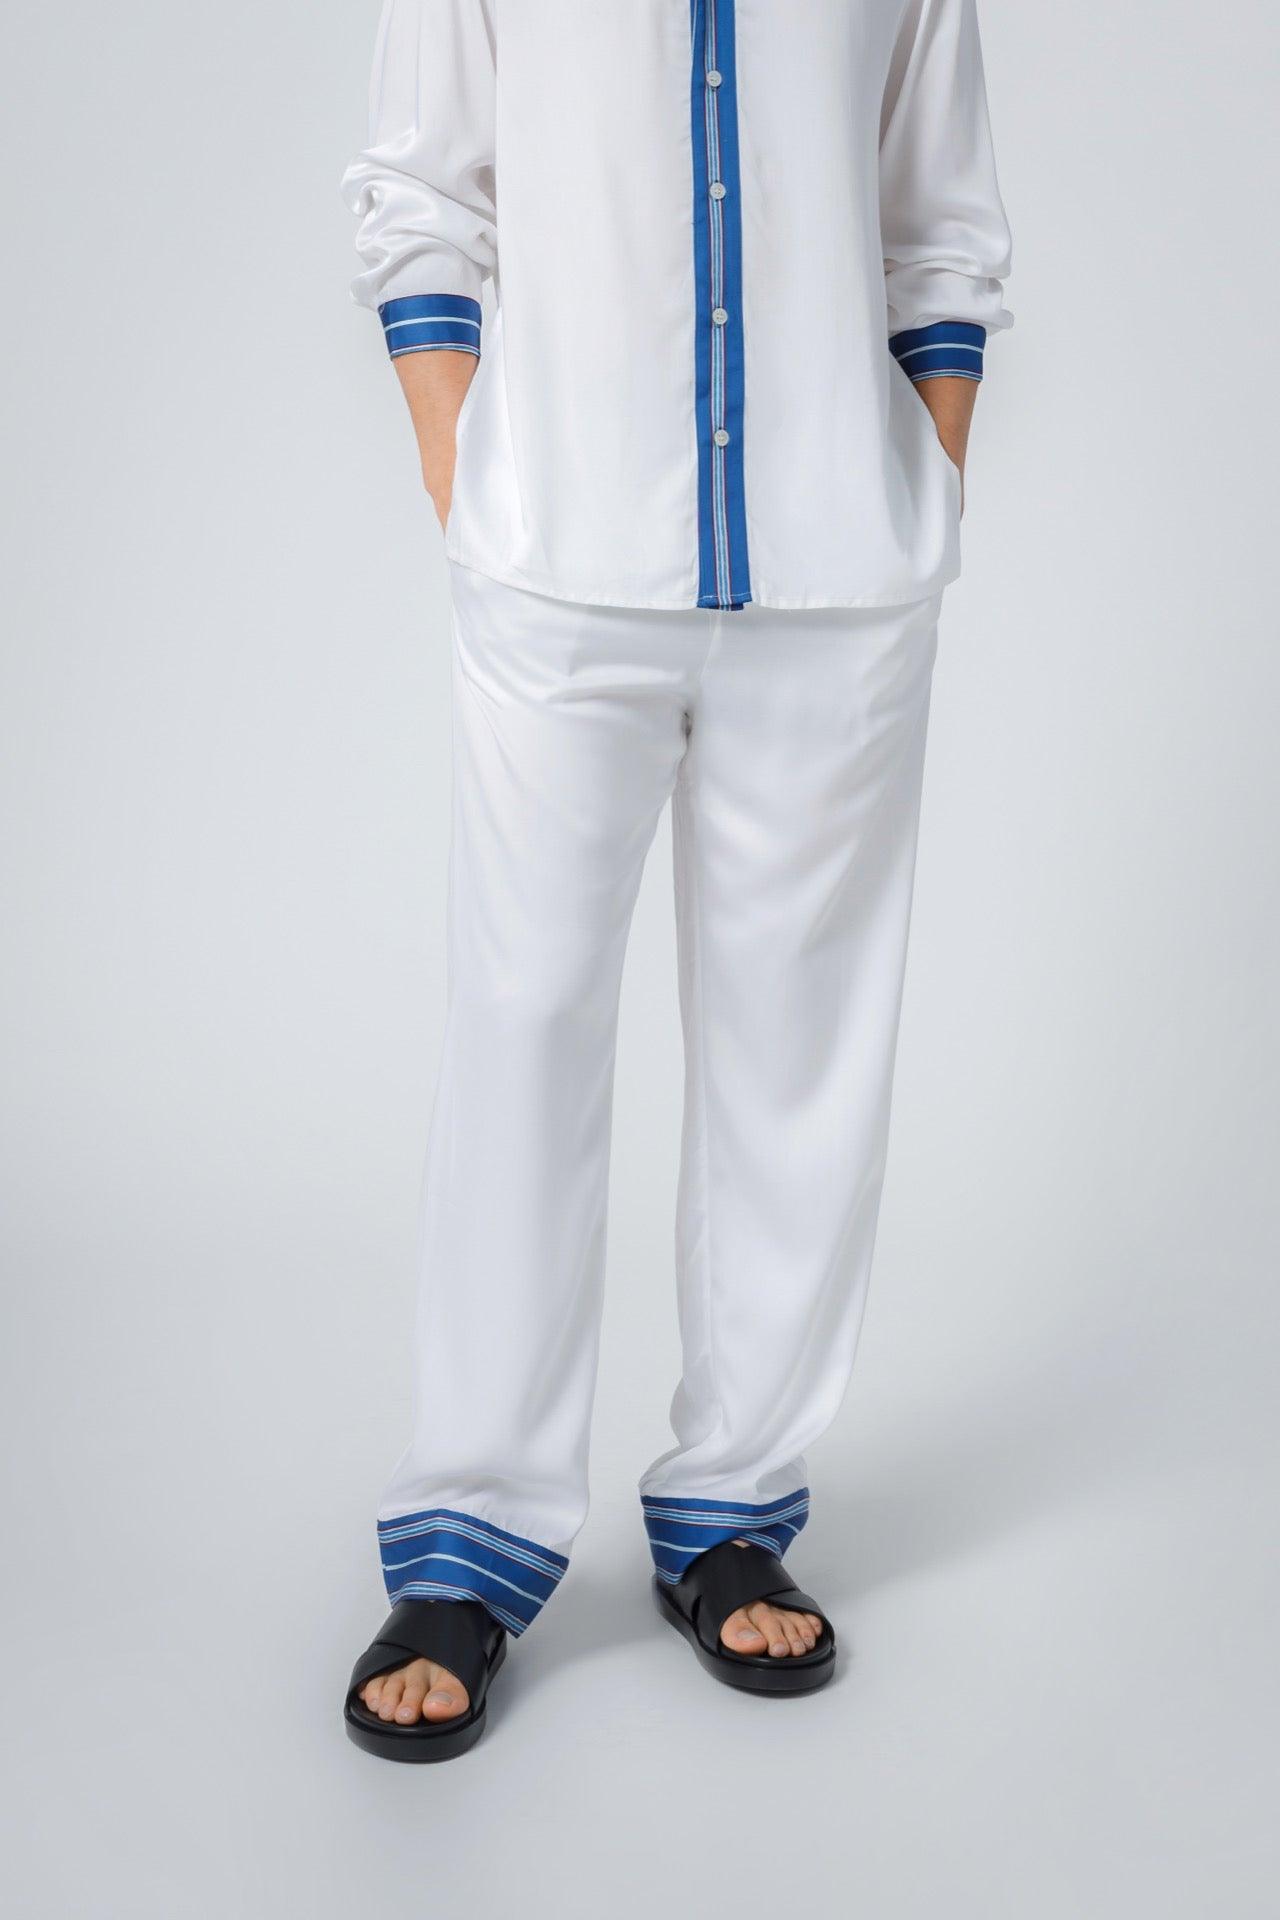 Embrace Comfort and Style with Bamboo Men’s Pajamas